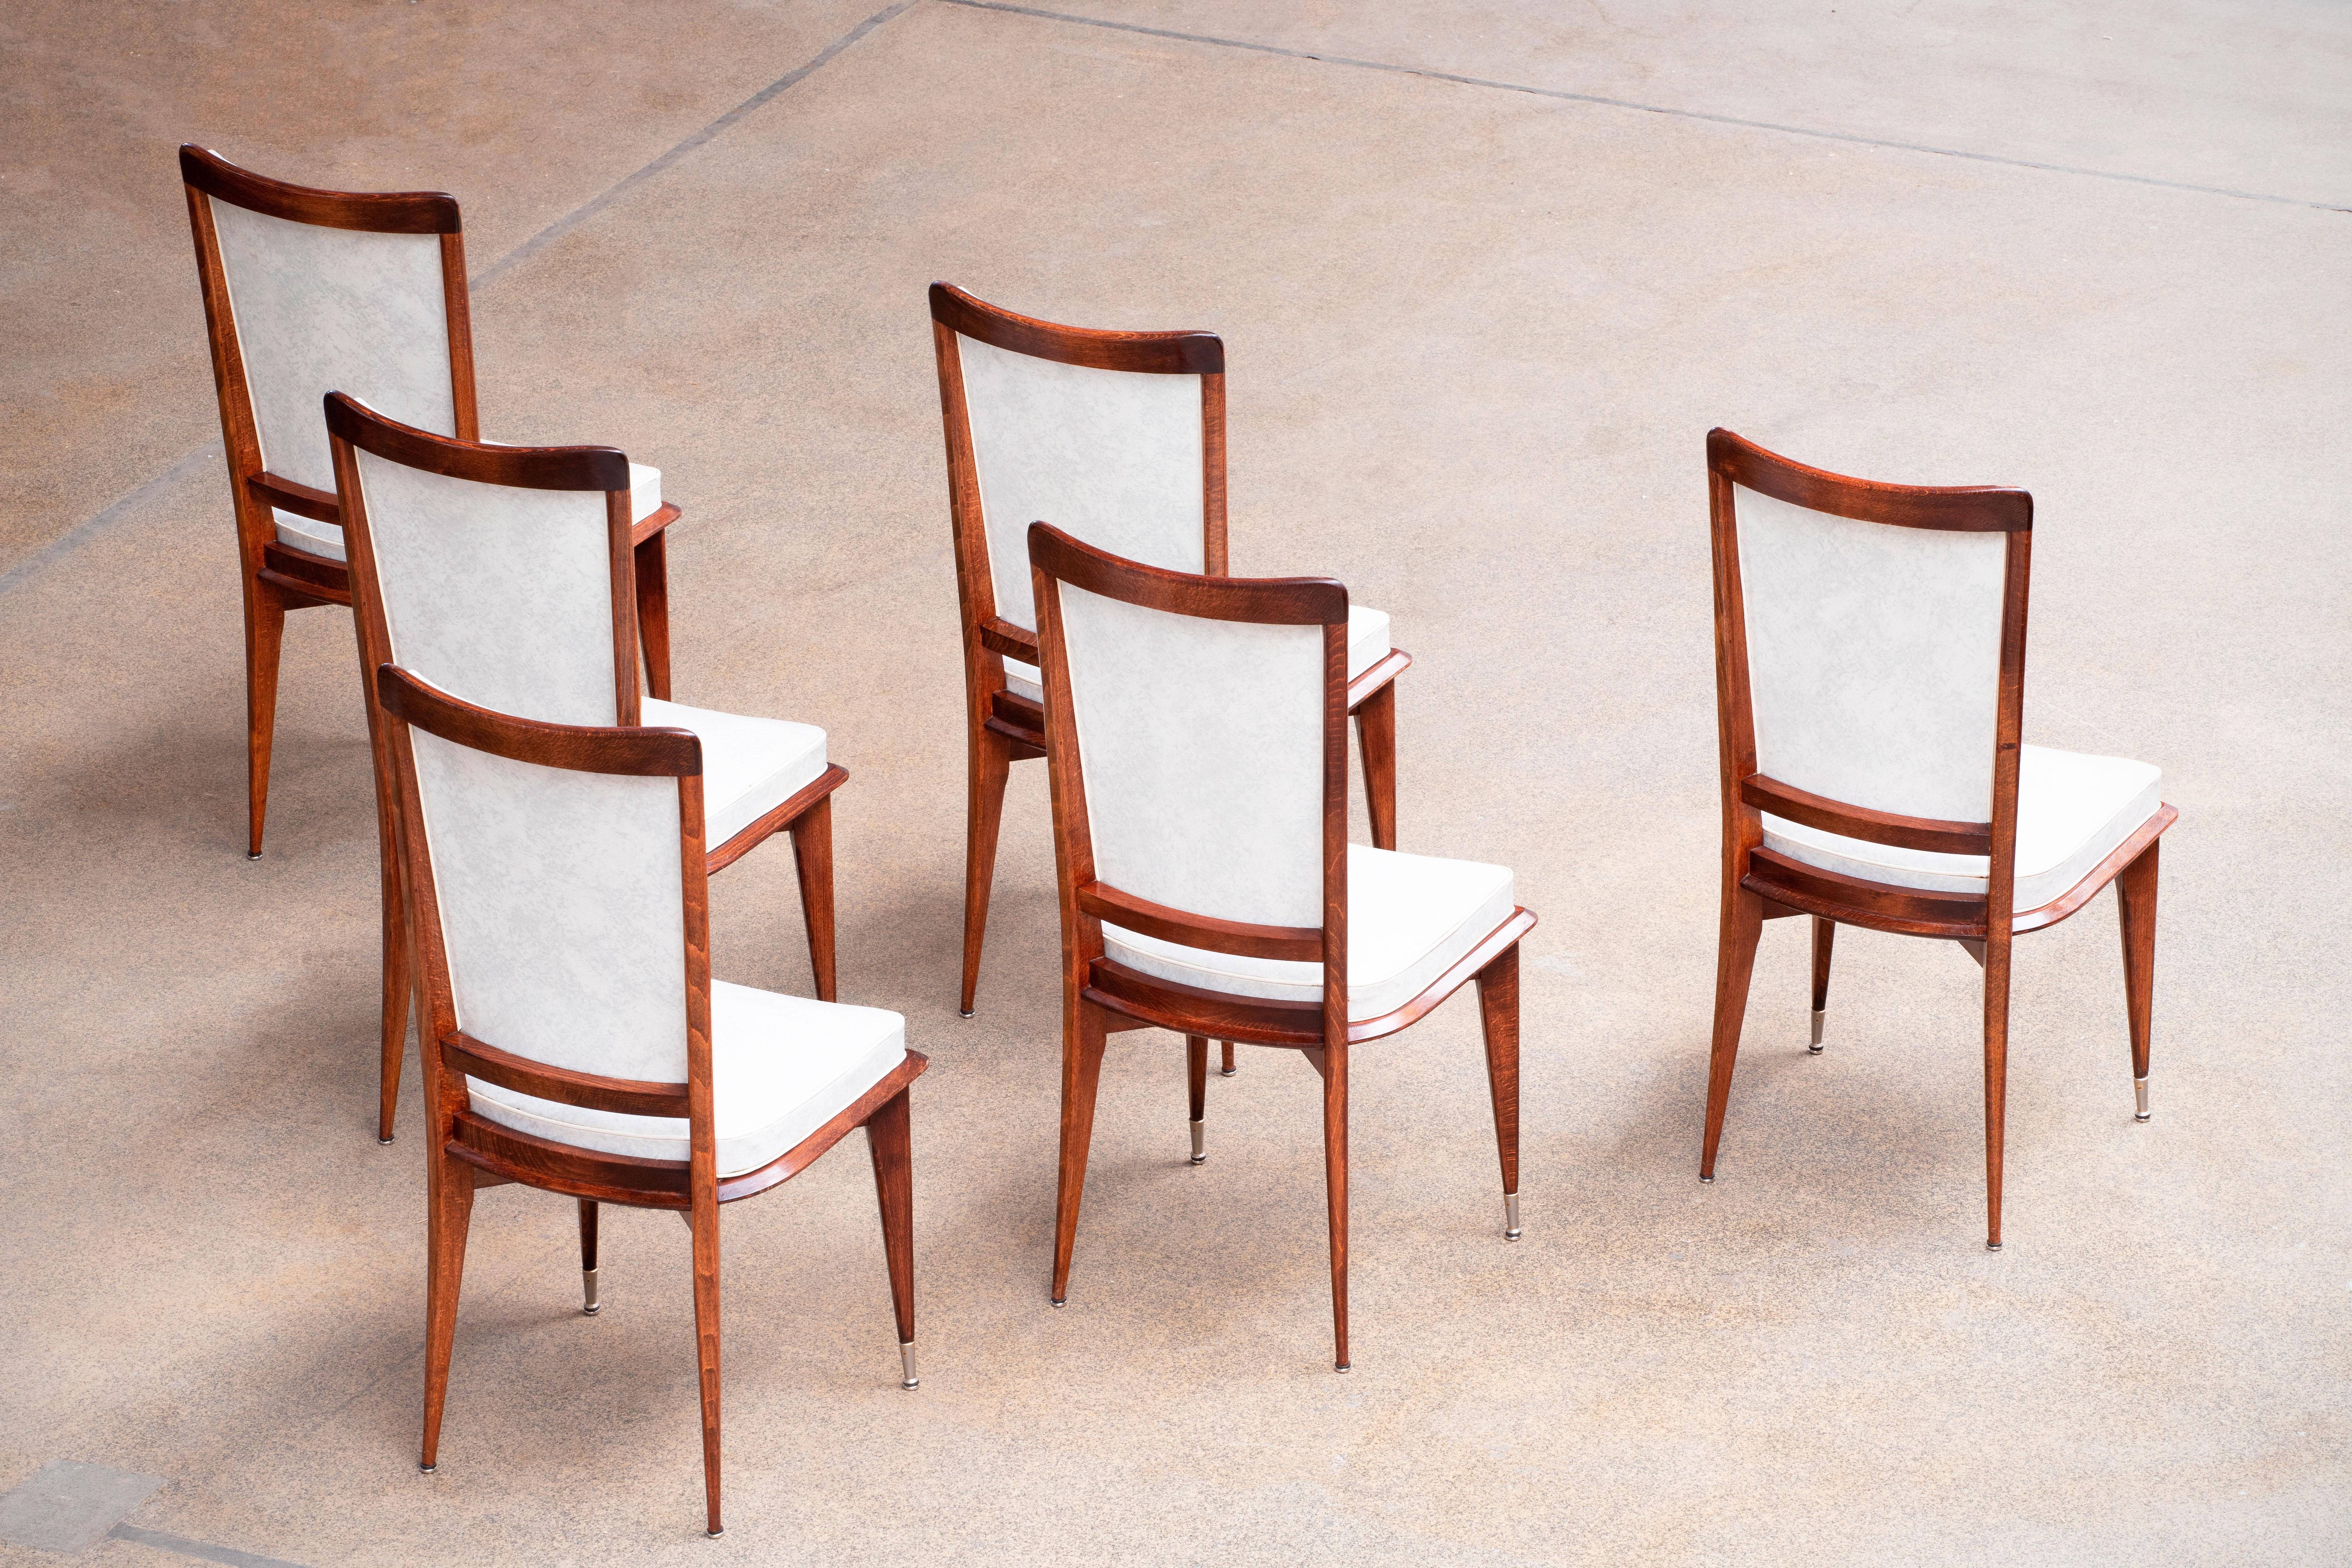 Mid-20th Century Art Deco Set of 6 Chairs, France, 1940